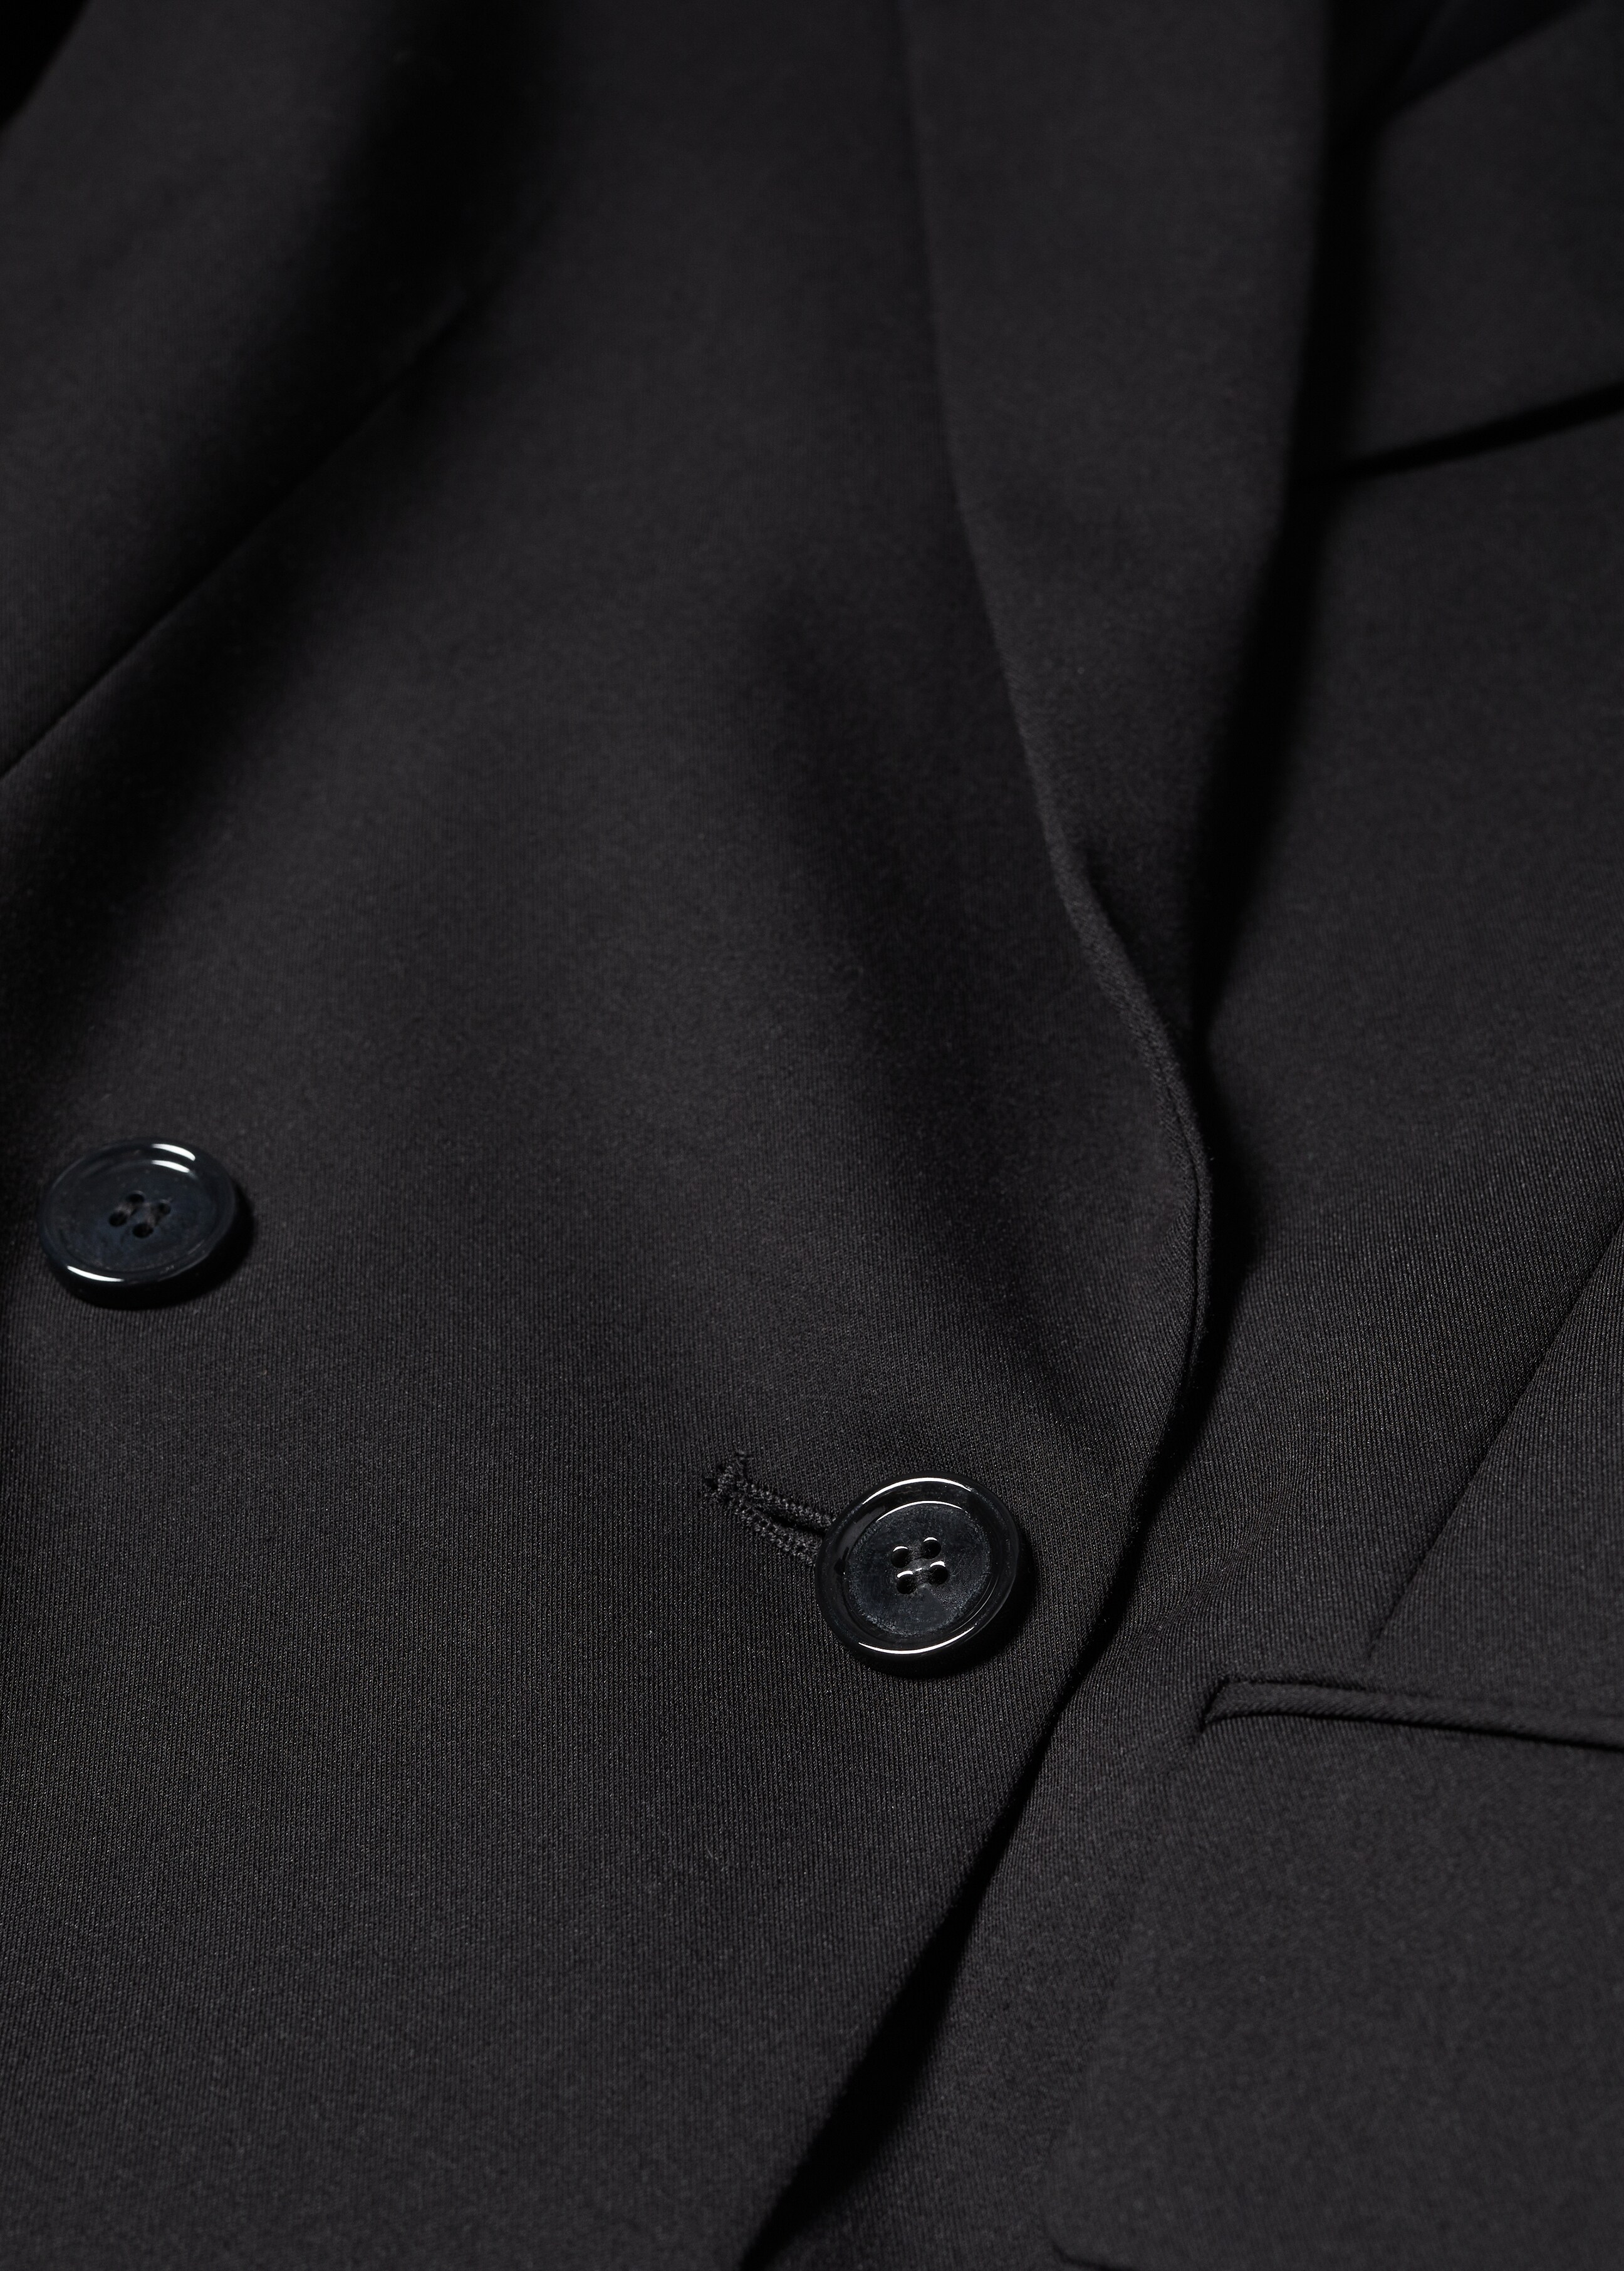 Double-breasted blazer - Details of the article 8